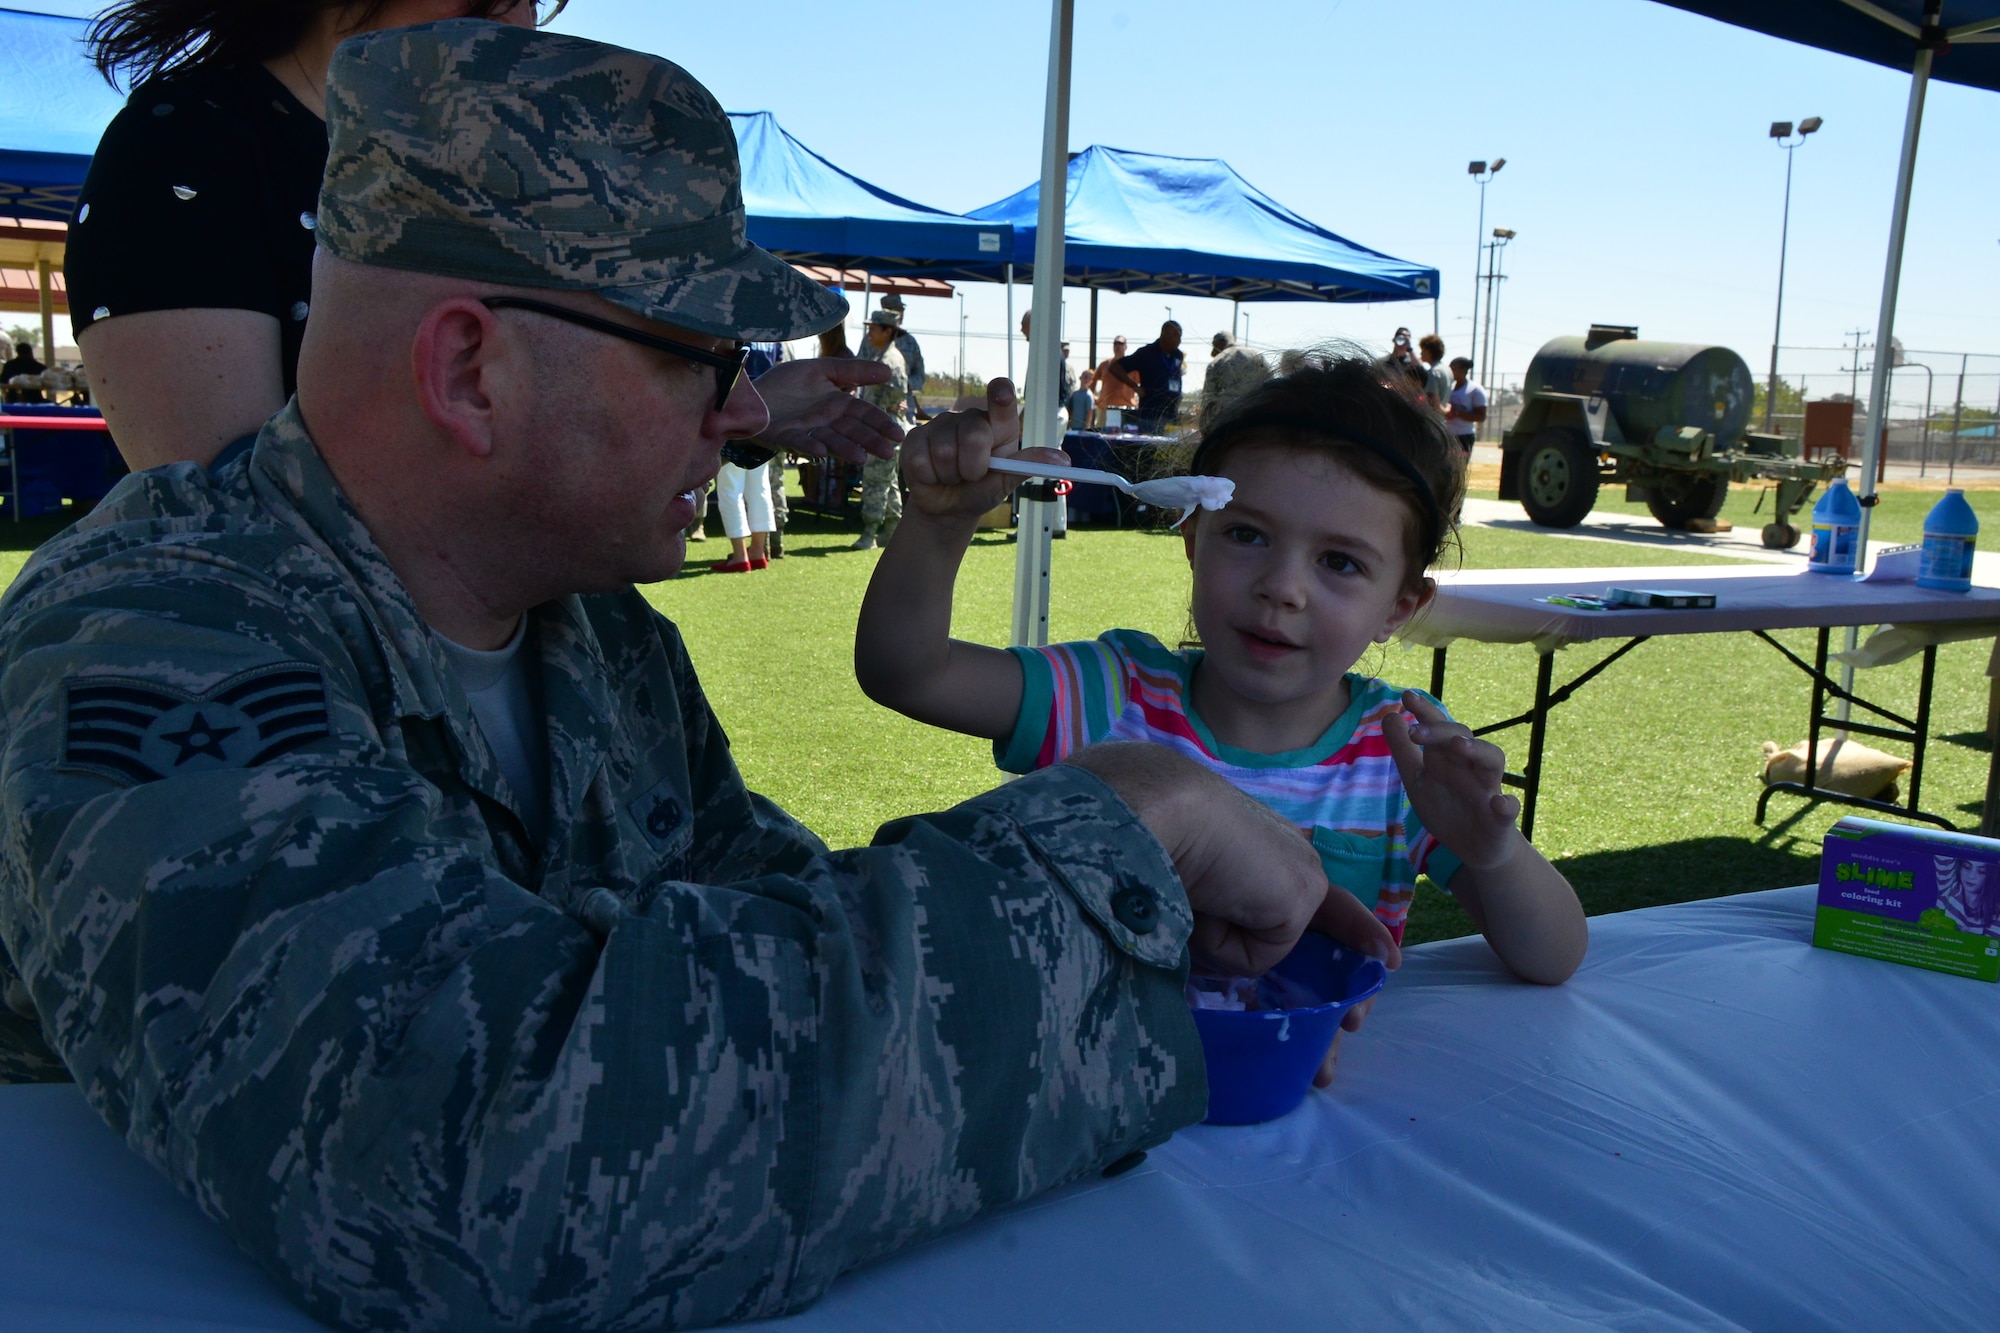 he 349th Air Mobility Wing hosted Operation Family Circle, in which families were able to experience a variety of demonstration booths, activities, and food.